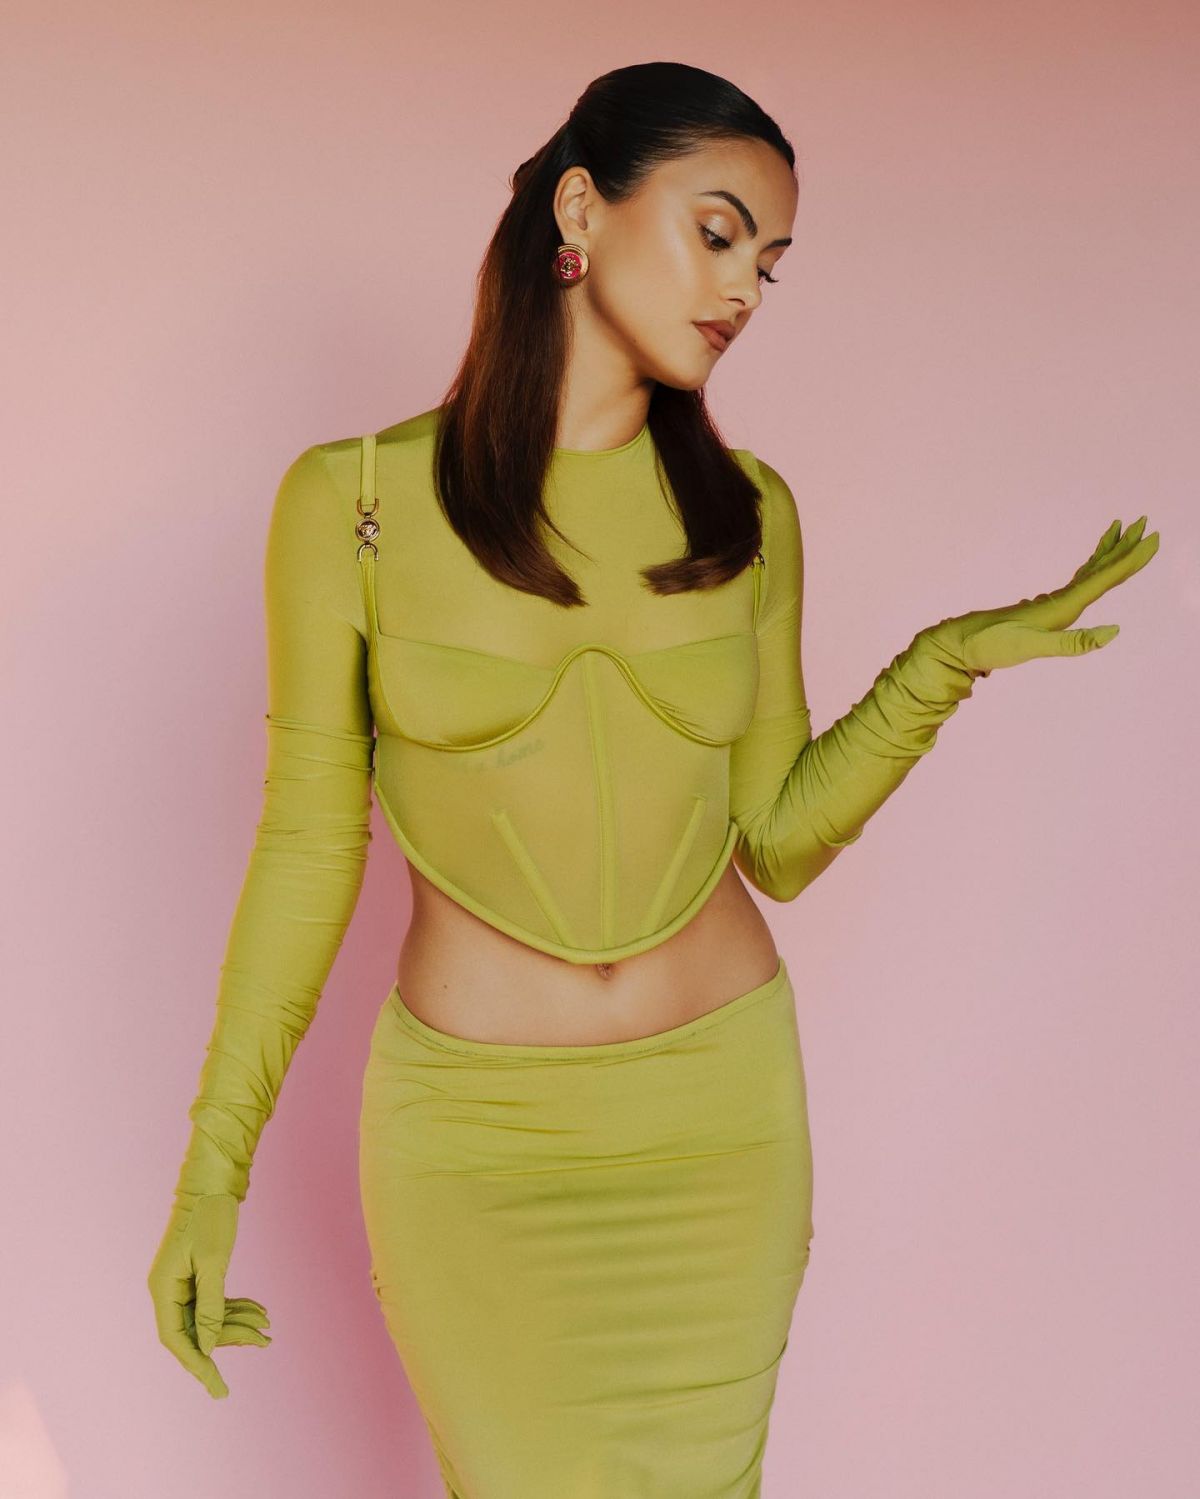 Camila Mendes seen in Versace Neon Stylish Dress at a Photoshoot 4